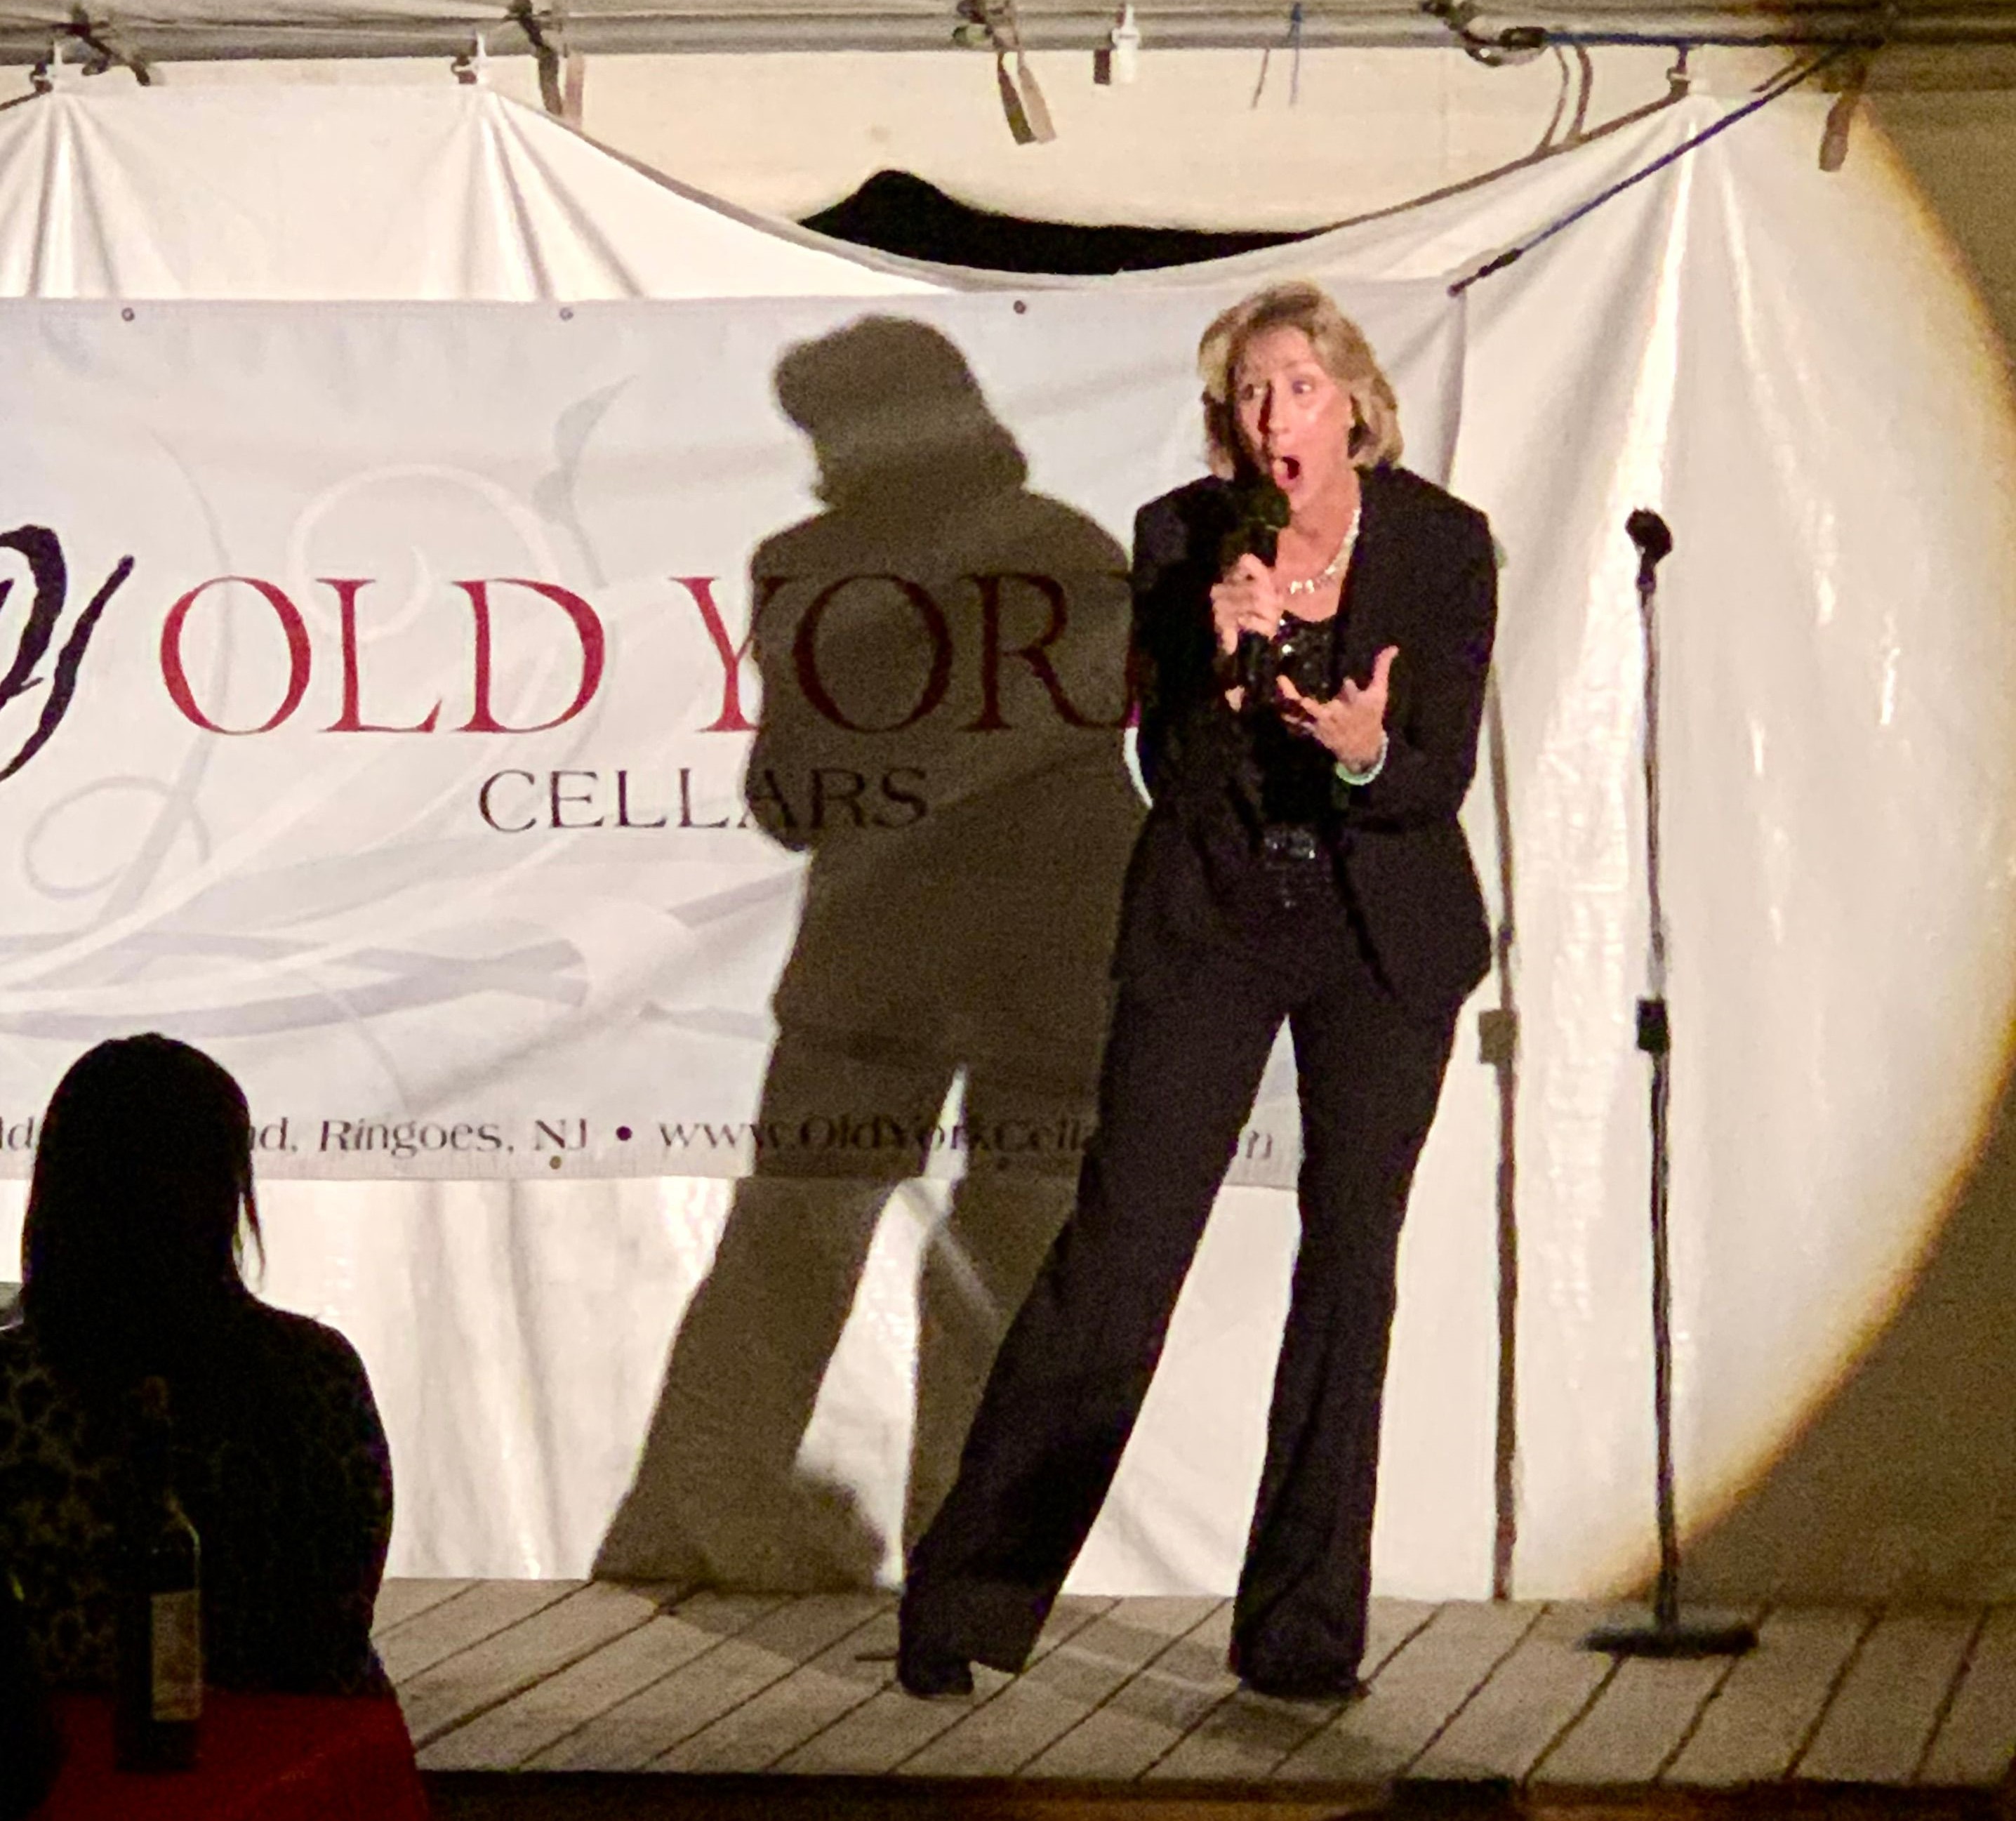 Comedian, Helene Angley performing at Old York Cellars Winery